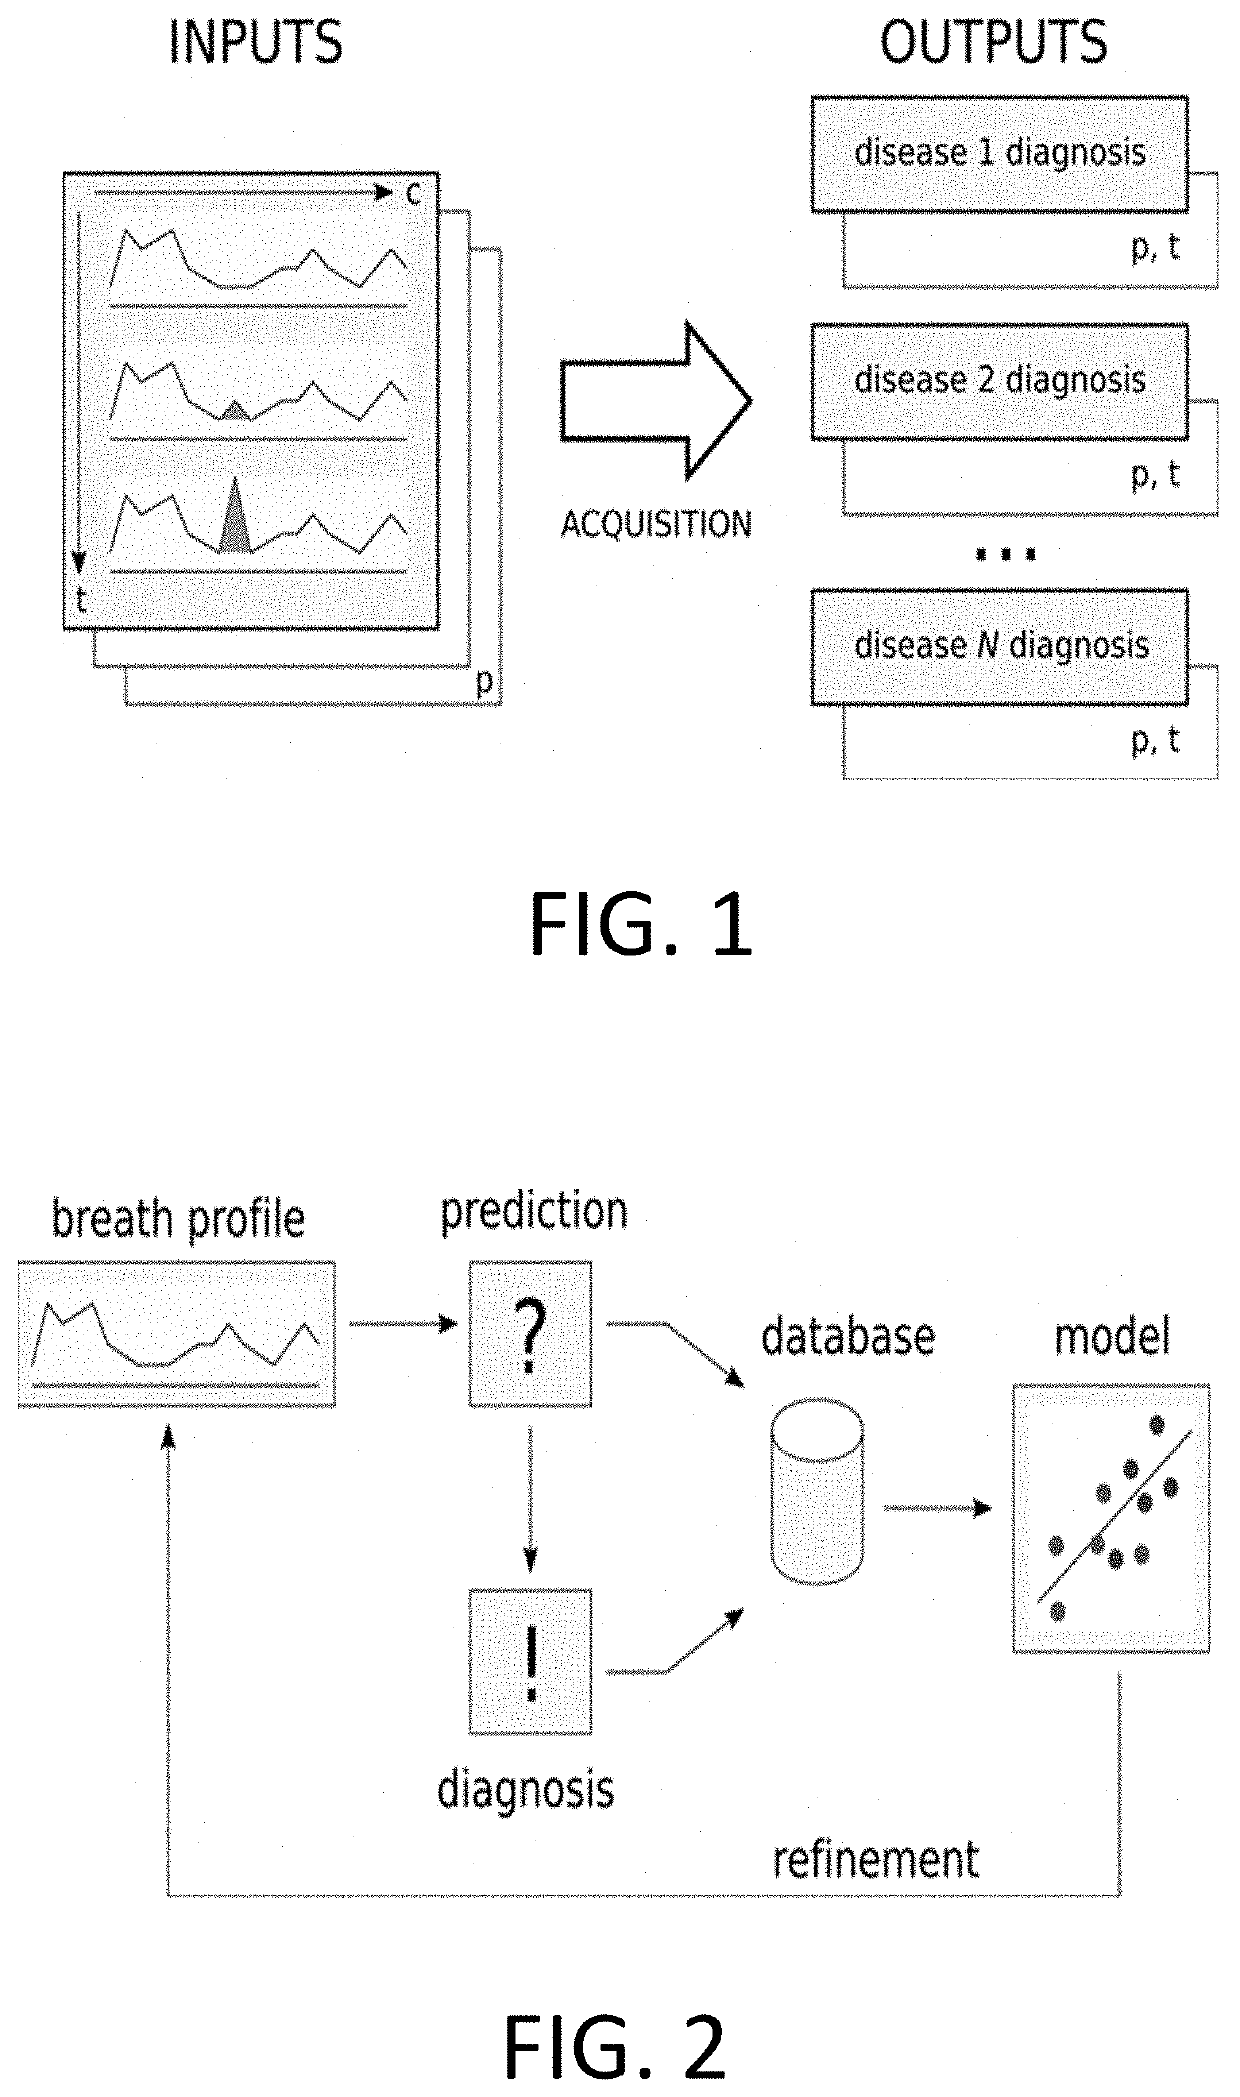 Systems and methods for predicting diseases